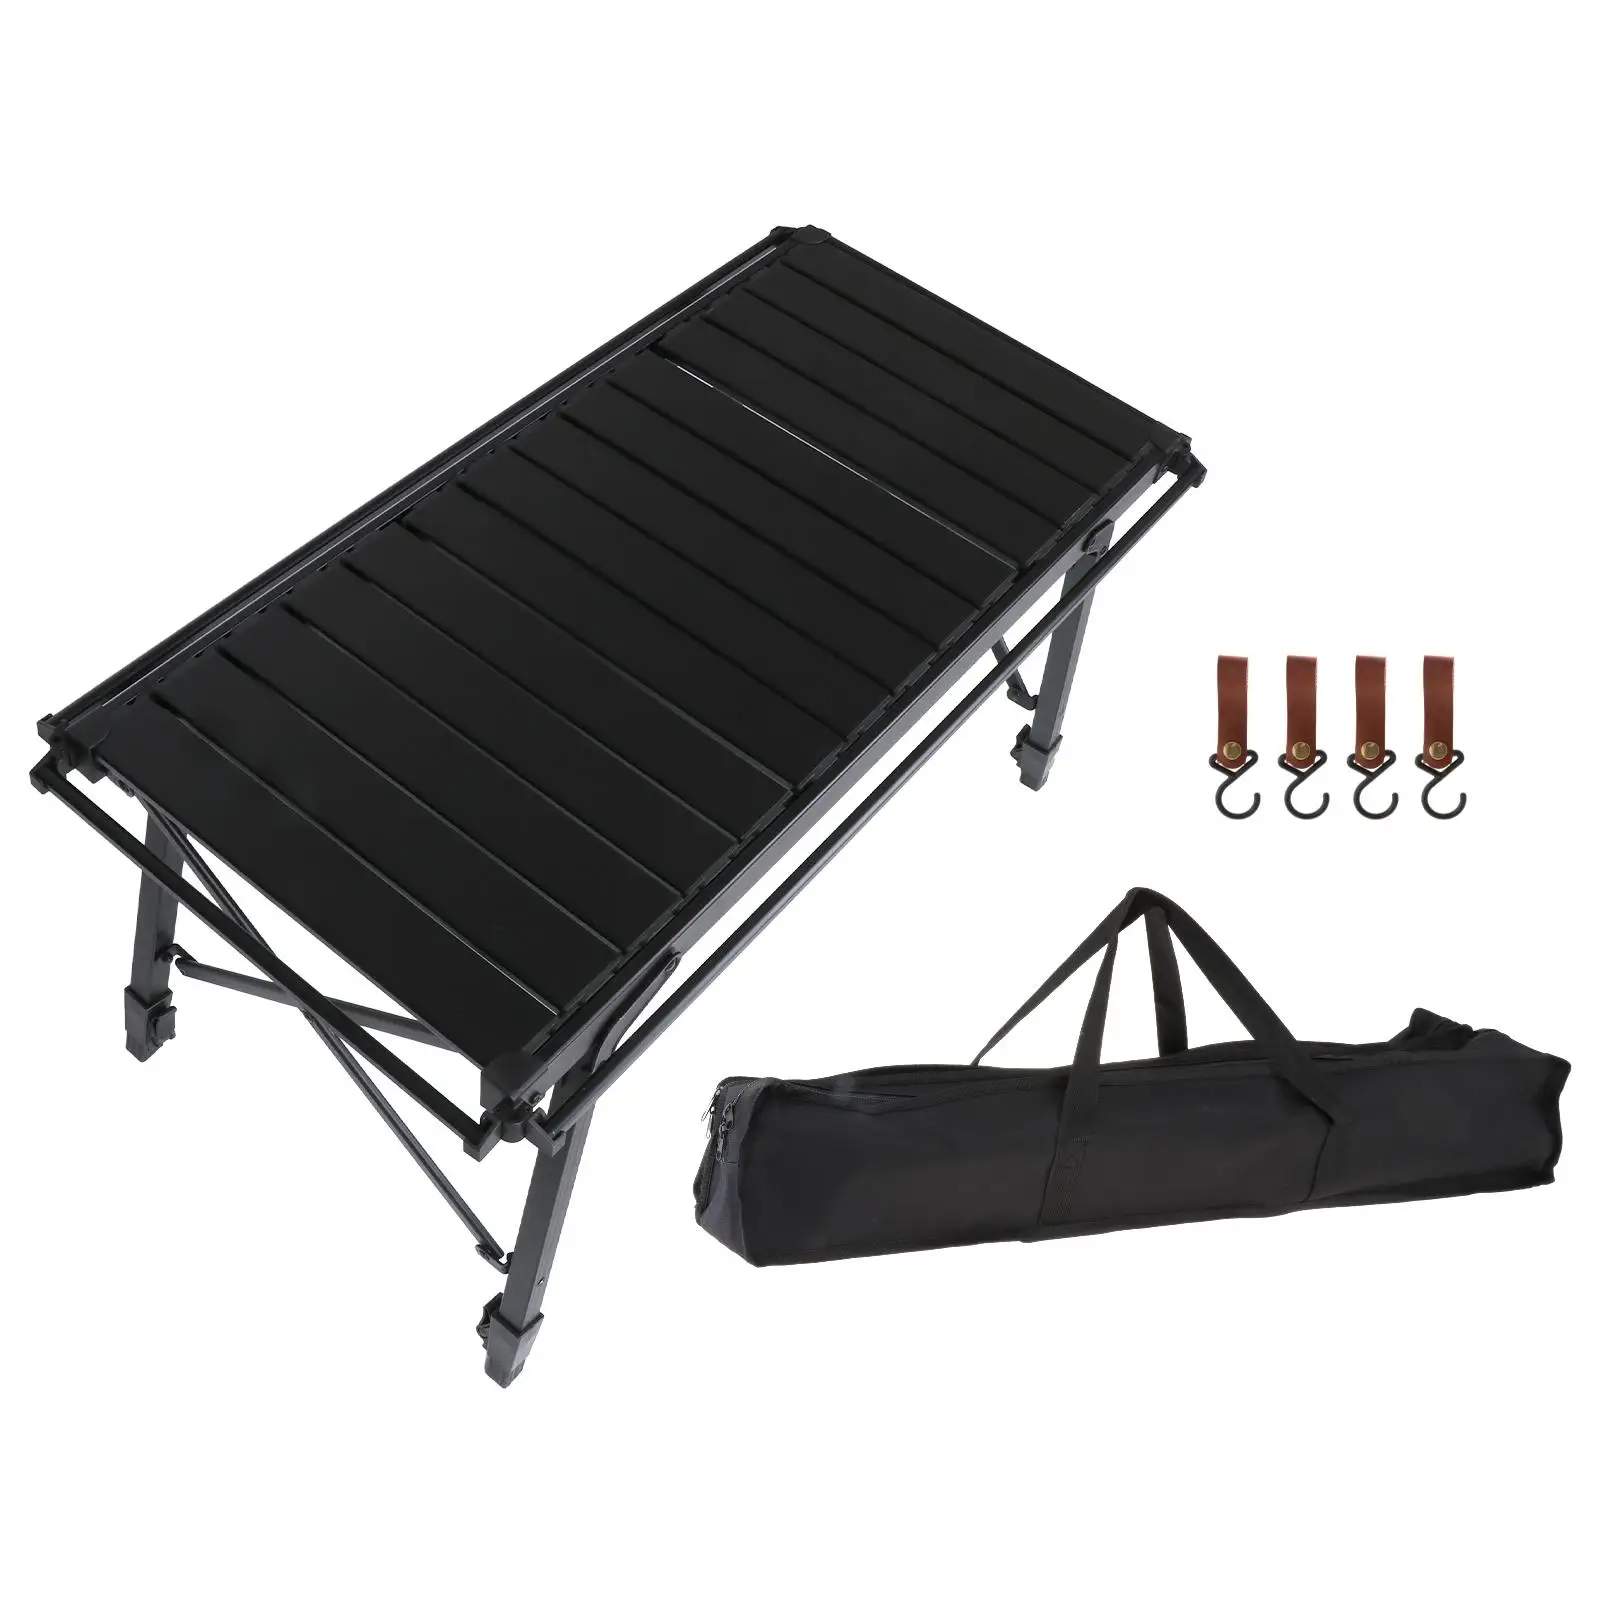 Camping Folding Table Compact Aluminum Alloy with Storage Bag Easy to Carry Outdoor Table for Fishing Beach BBQ Garden Kitchen